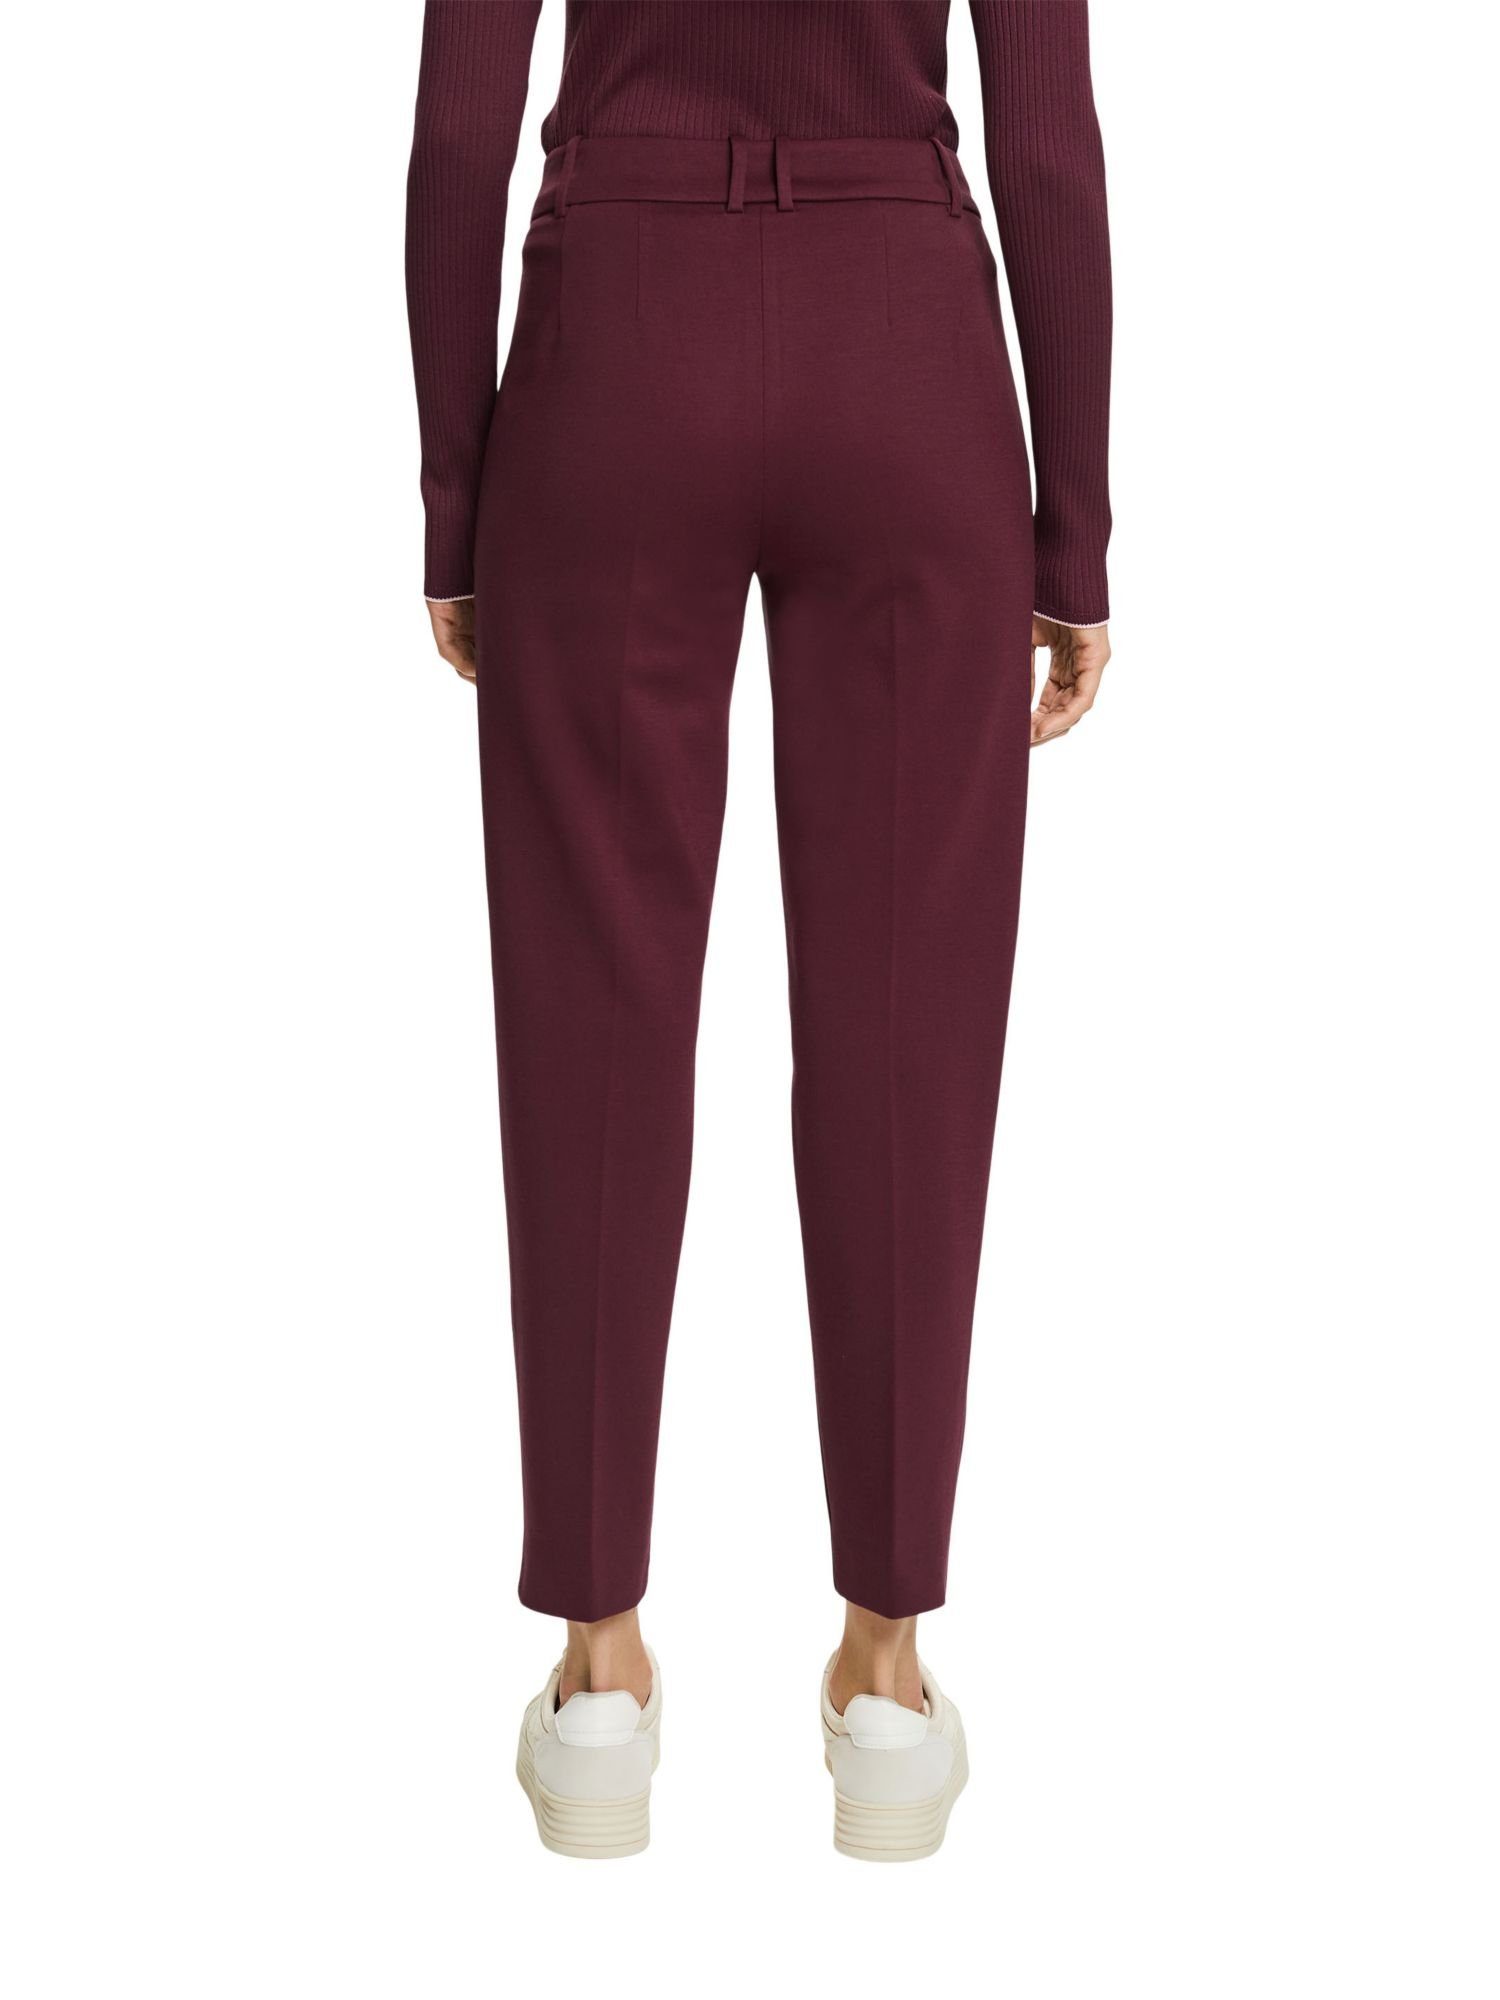 Tapered Stretch-Hose & AUBERGINE Esprit SPORTY Collection Match Pants PUNTO Mix